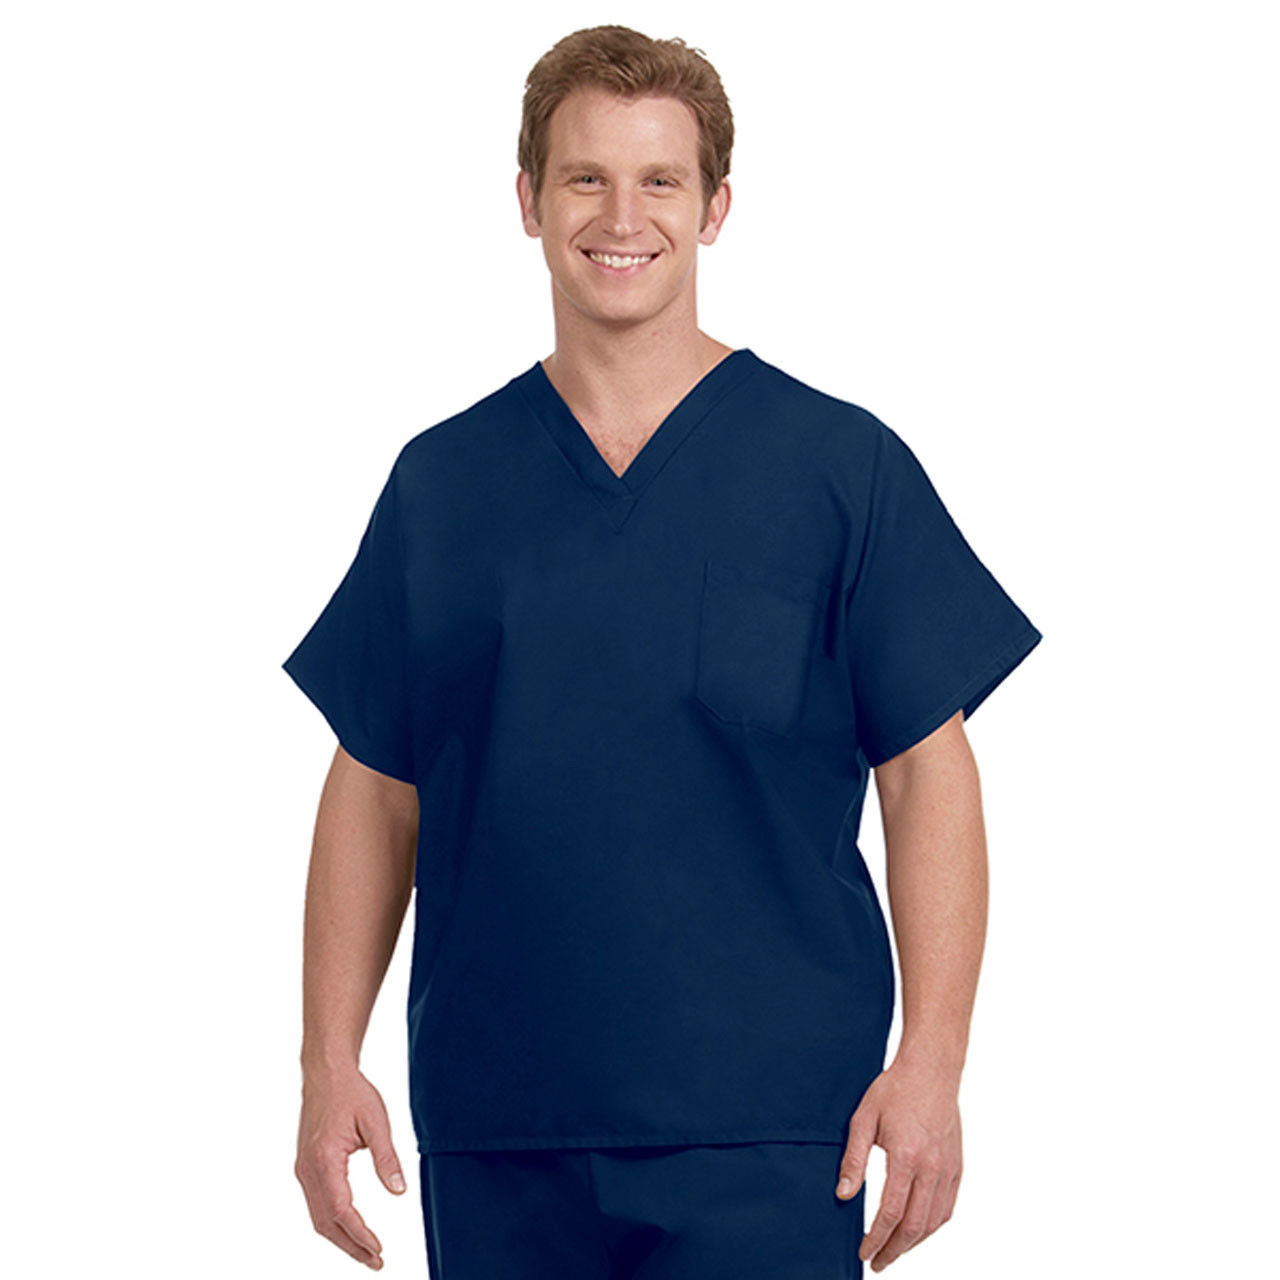 Do these scrub tops feature a pocket?